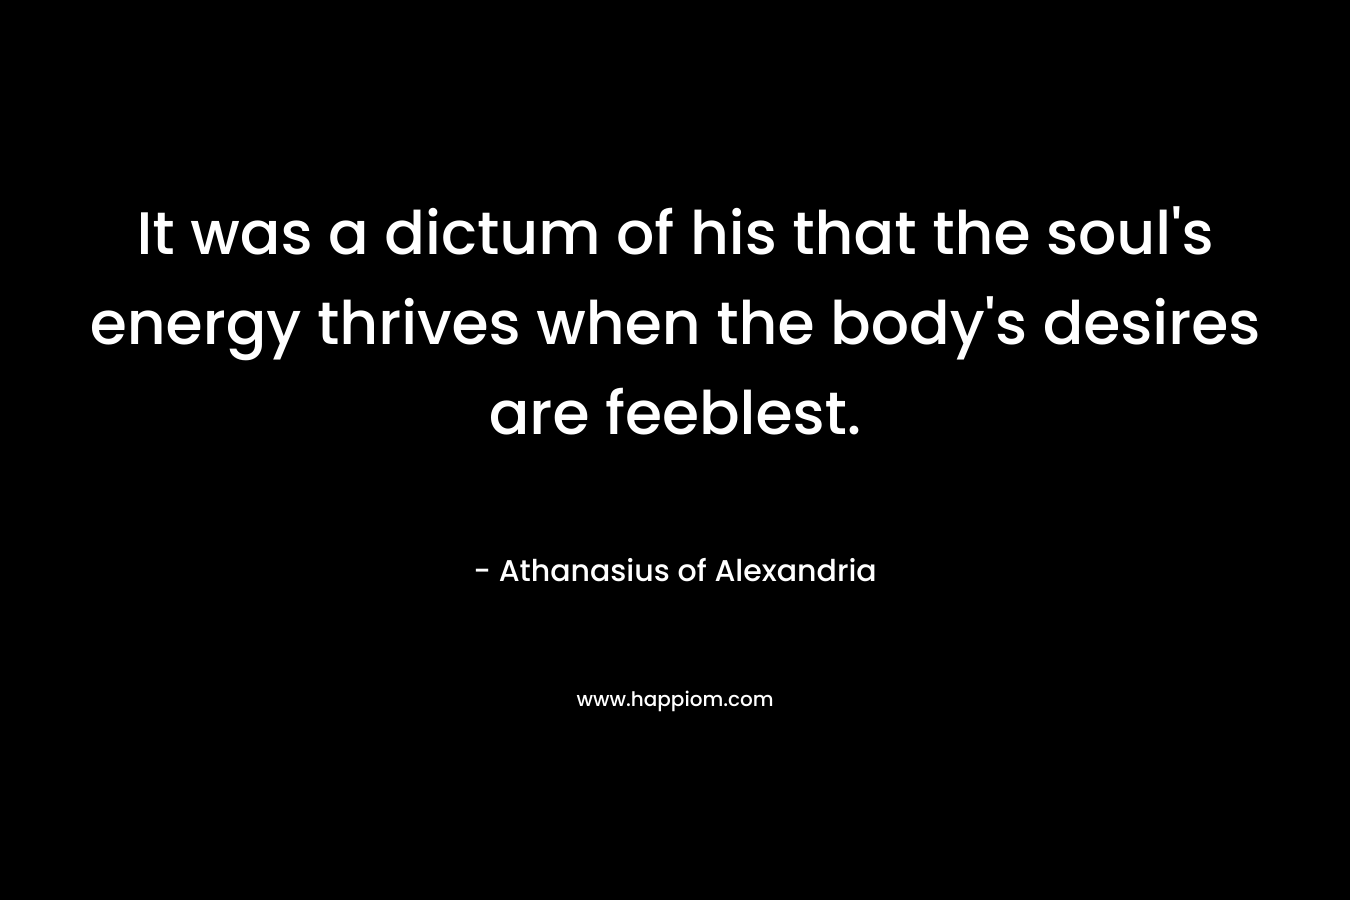 It was a dictum of his that the soul's energy thrives when the body's desires are feeblest.